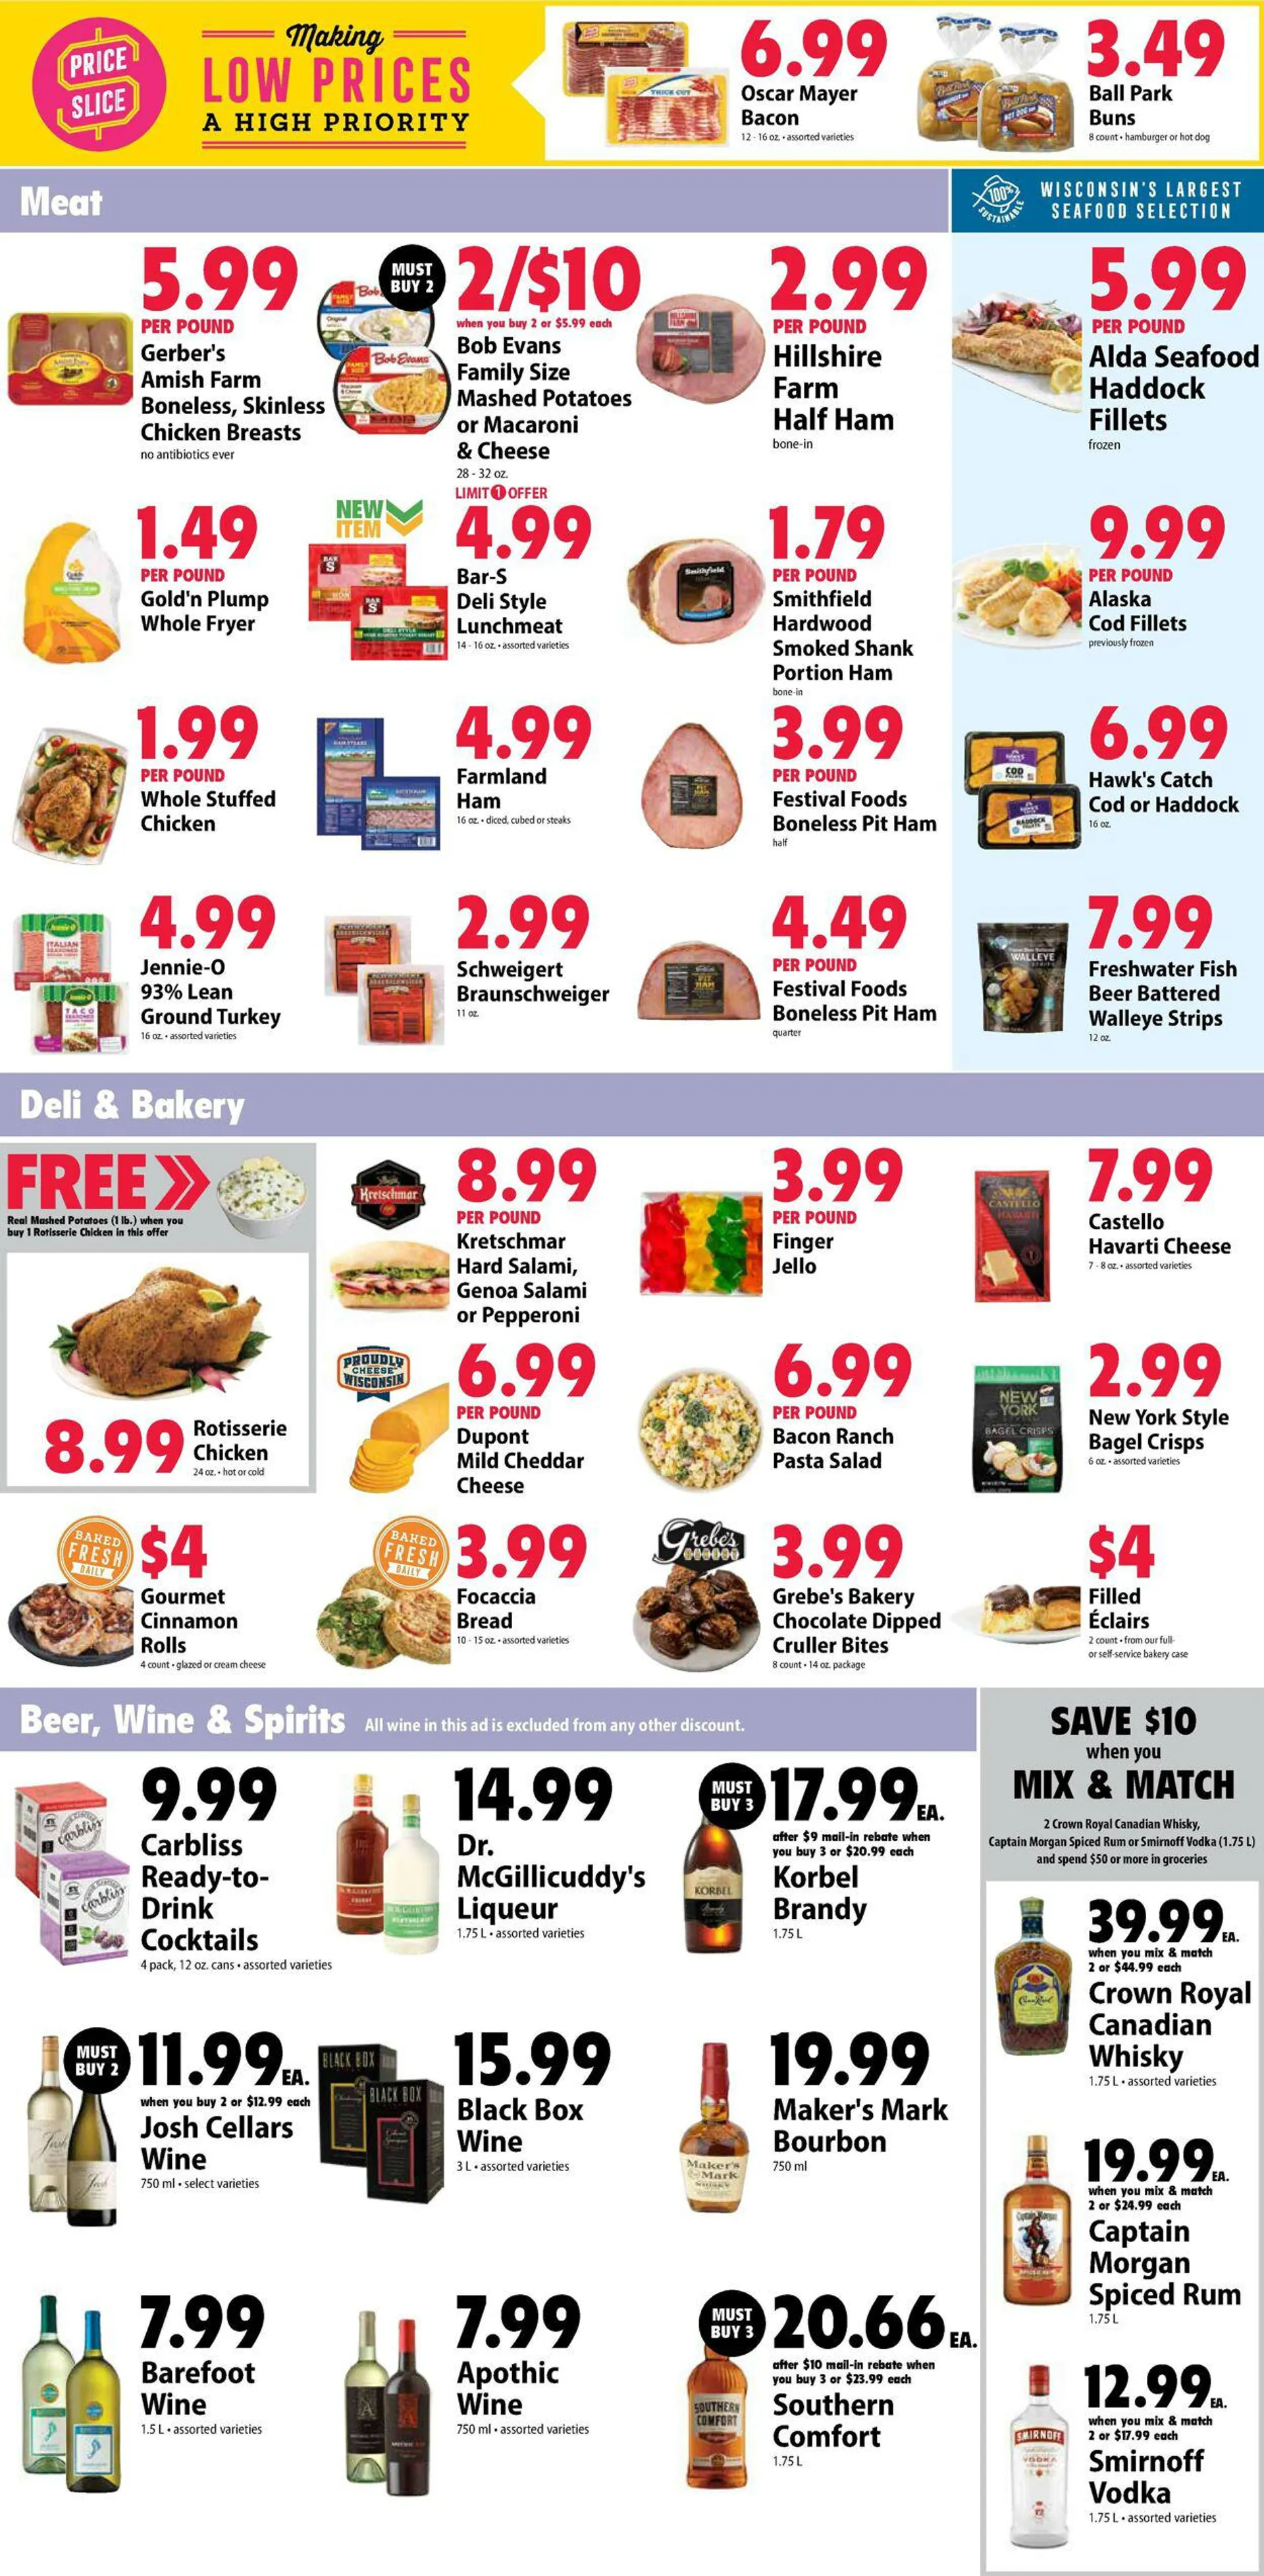 Festival Foods Current weekly ad - 2